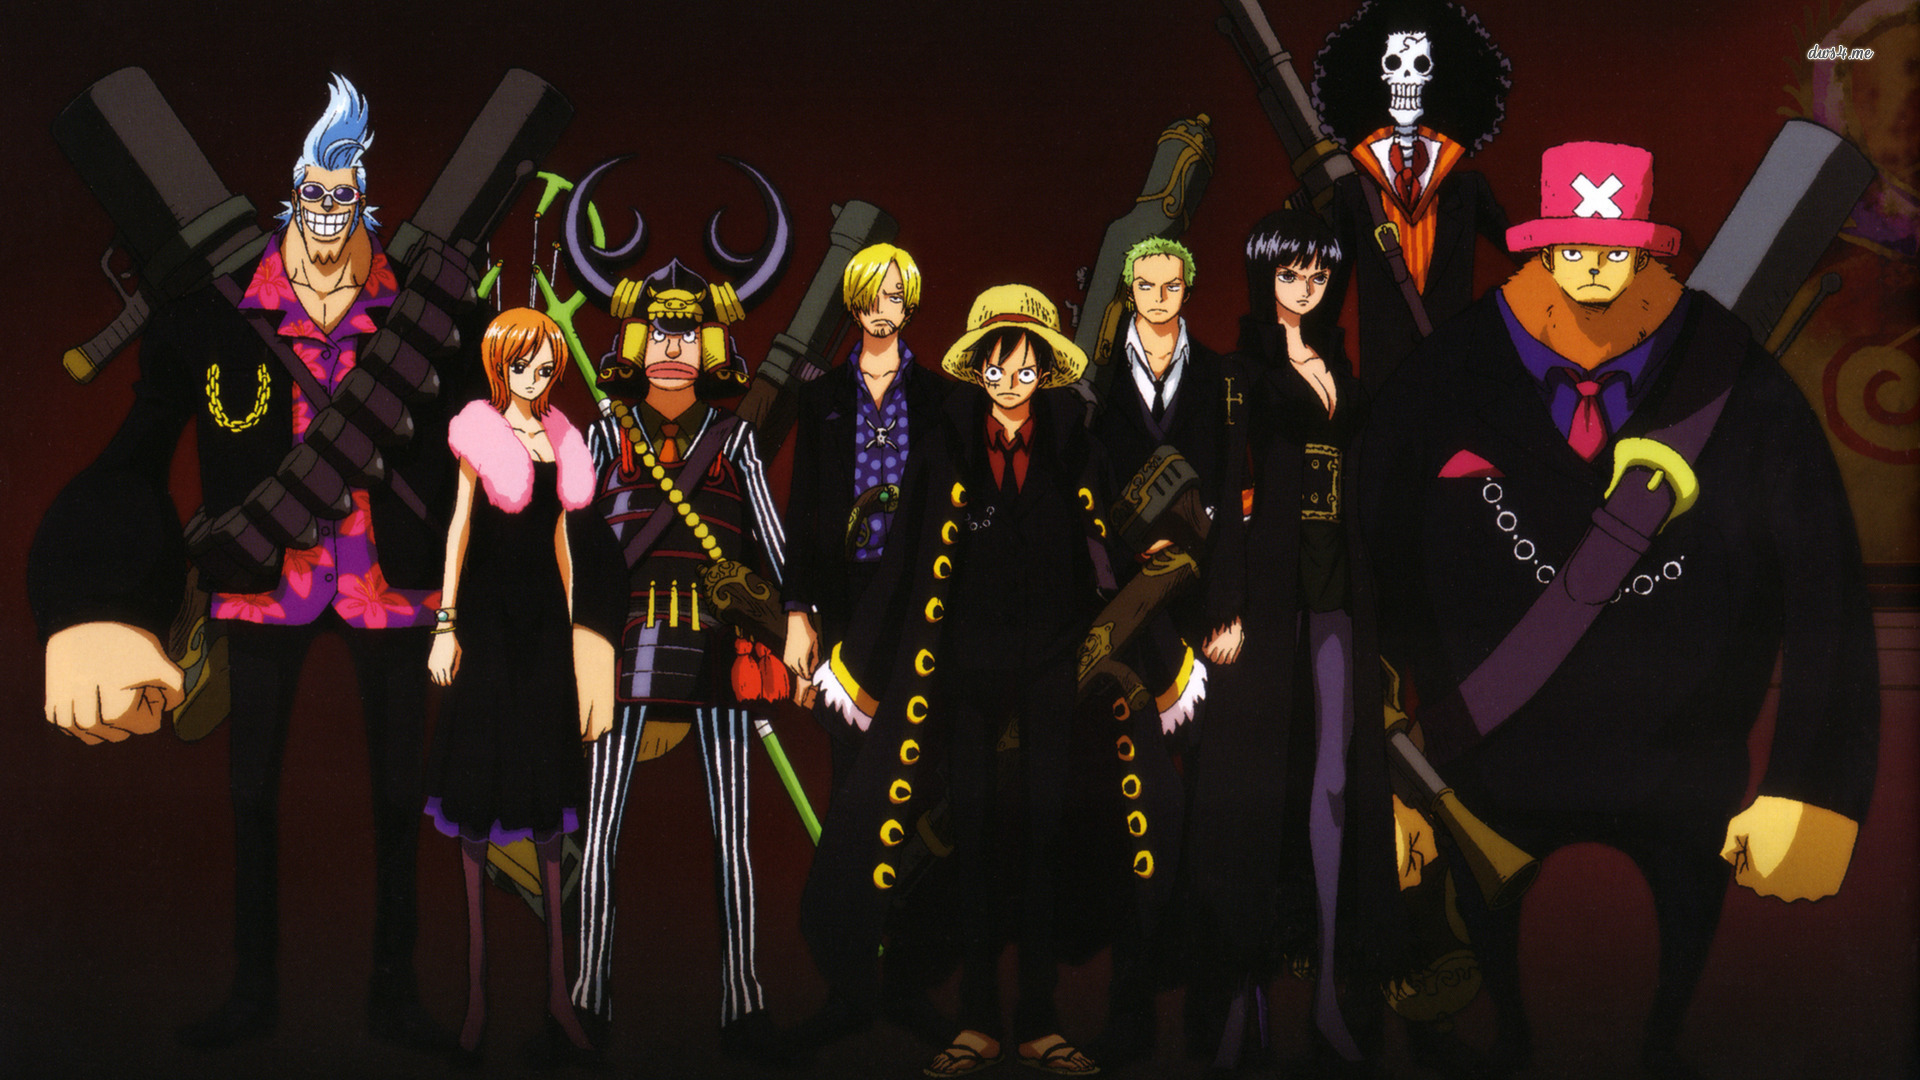 One Piece Wallpaper Free Download - Straw Hat Pirates Strong World - HD Wallpaper 